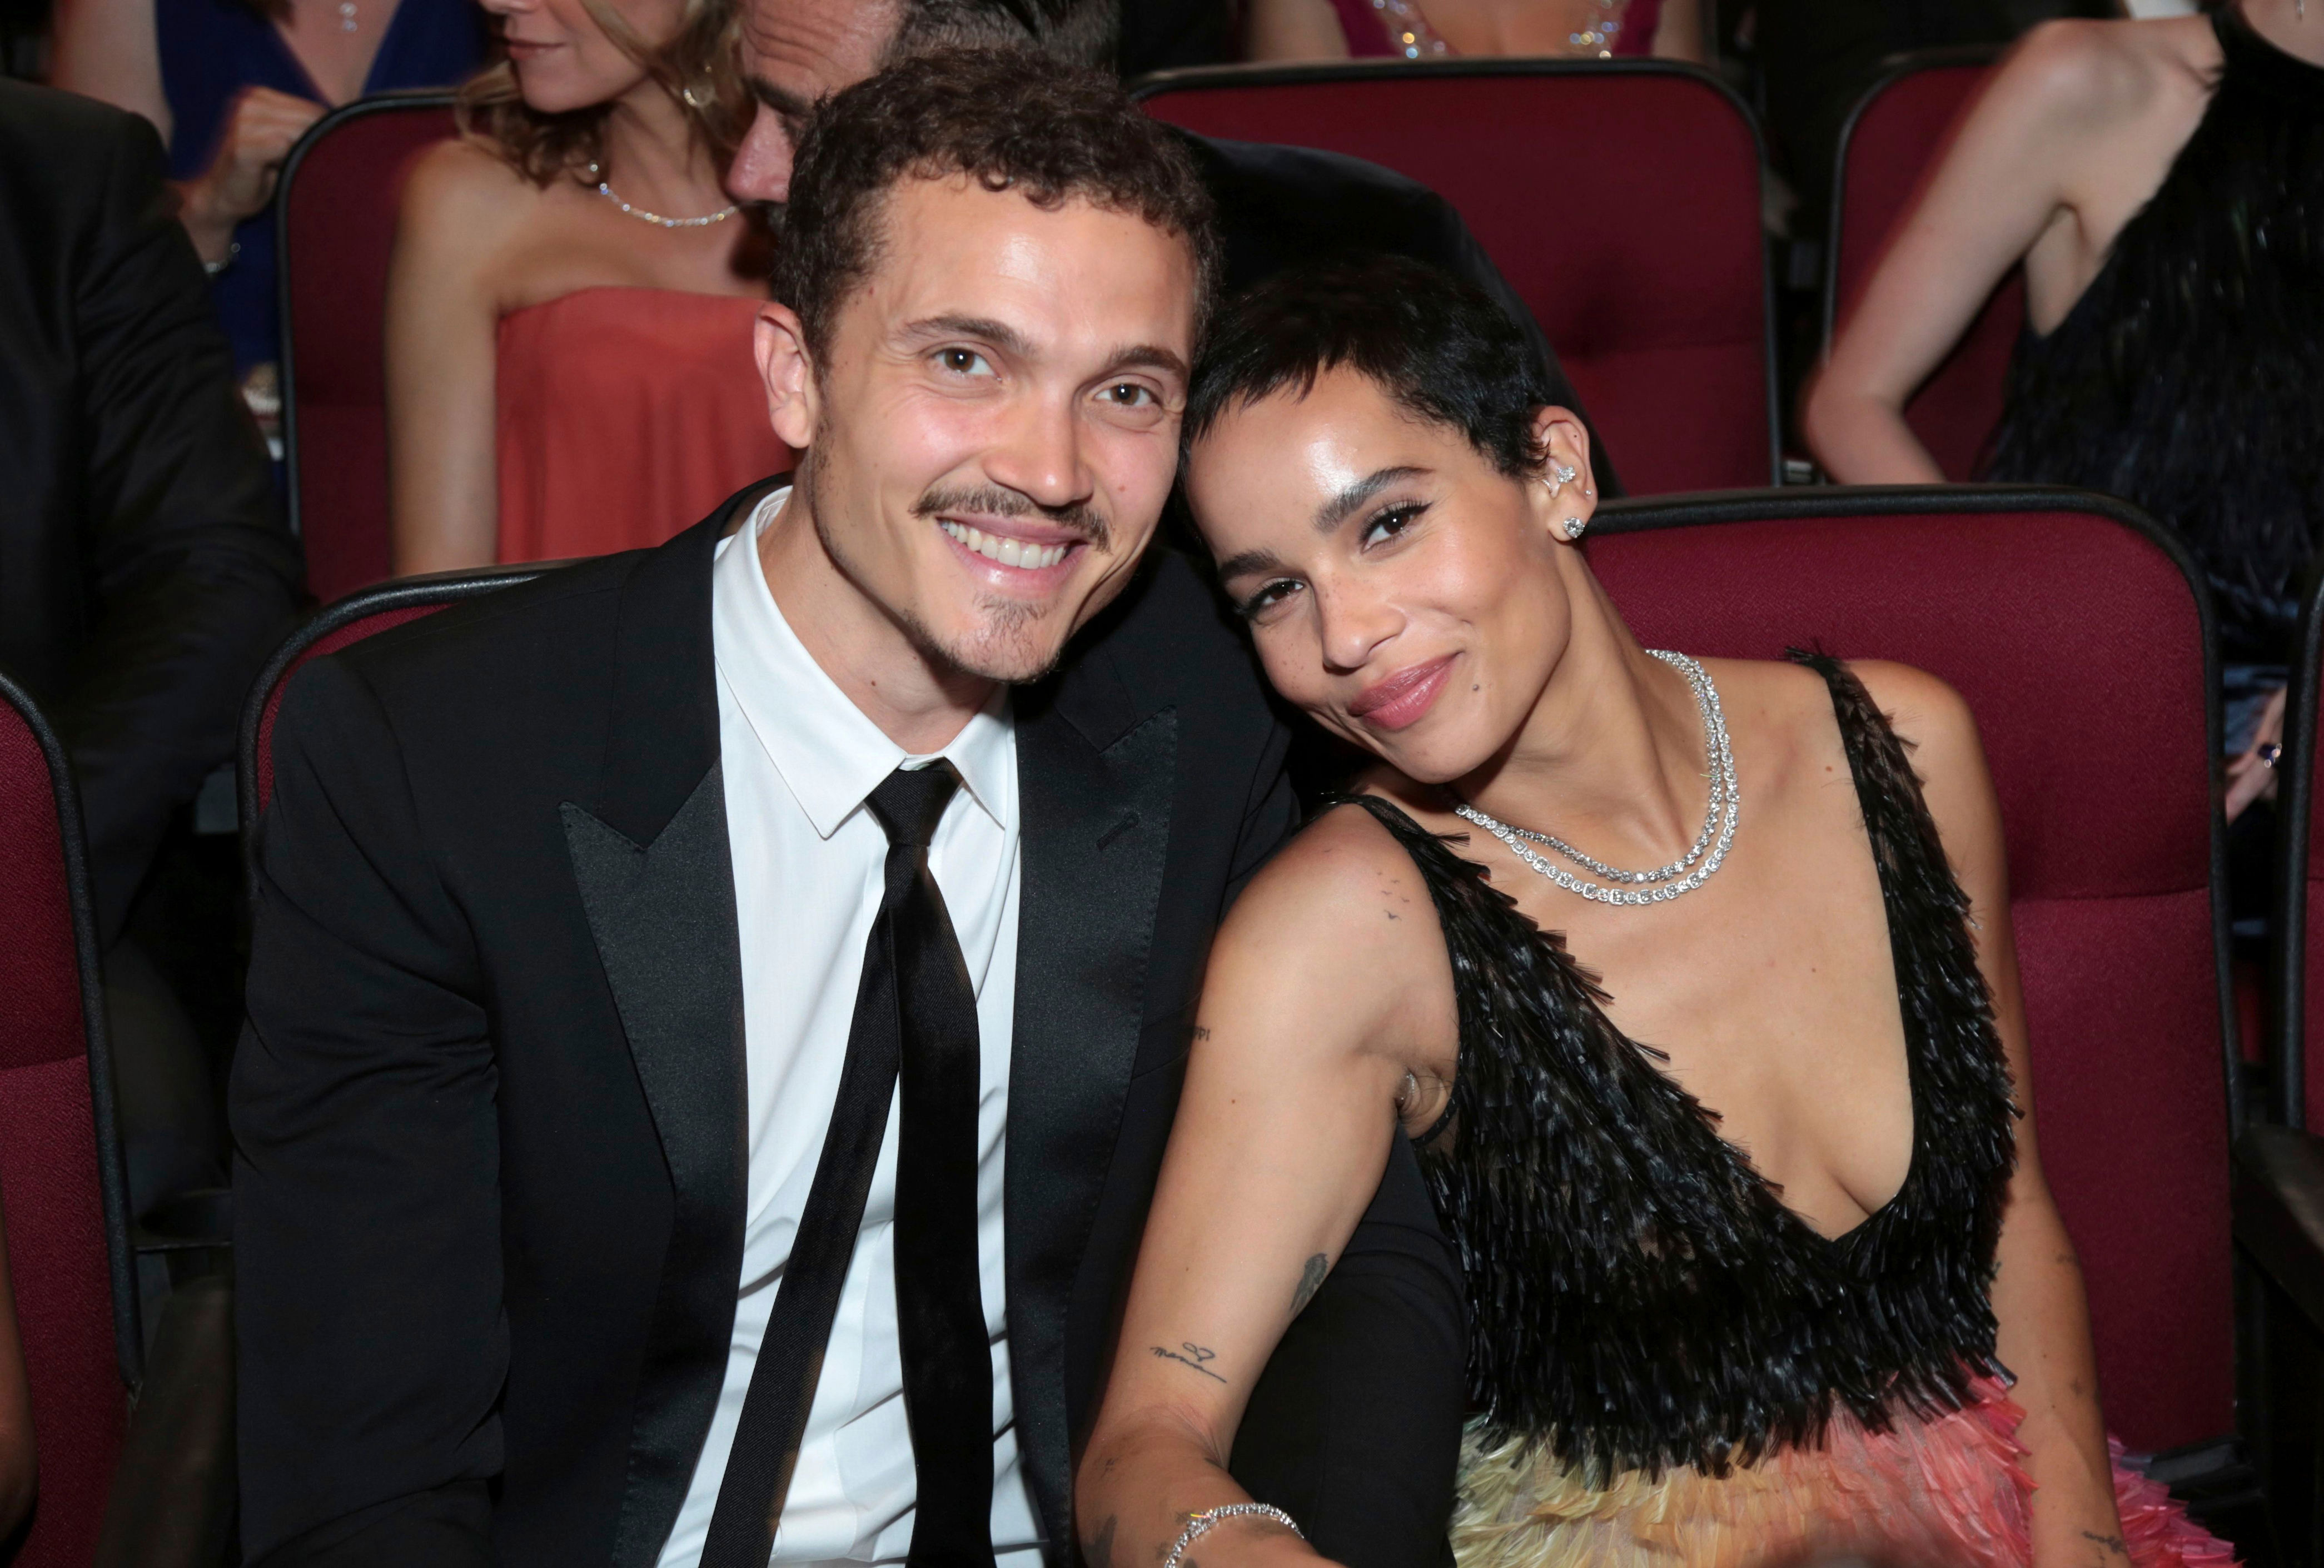 <p>Zoe Kravitz met "Love" star Karl Glusman at a bar during a night out with mutual friends in 2016, <a href="https://www.rollingstone.com/movies/movie-features/zoe-kravitz-naked-cover-story-746684/">Rolling Stone</a> revealed in a November 2018 cover story on the actress. Karl had long had a thing for the "High Fidelity" star but was too nervous to talk to her. Lucky for him, Zoe saw something in him too that night: She pretended to be on her phone outside the bar so that she could invite Karl back to her place for an afterparty as he left -- and they ended up making out. "It was cute!" the "Big Little Lies" actress told Rolling Stone. Karl moved in not long after that and they got engaged in February 2018 and married the following year. But it wasn't meant to last and <a href="https://www.wonderwall.com/celebrity/couples/celebrity-splits-2020-hollywood-couples-breakup-called-it-quits-3022390.gallery">Zoe filed for divorce</a> in December 2020.</p>